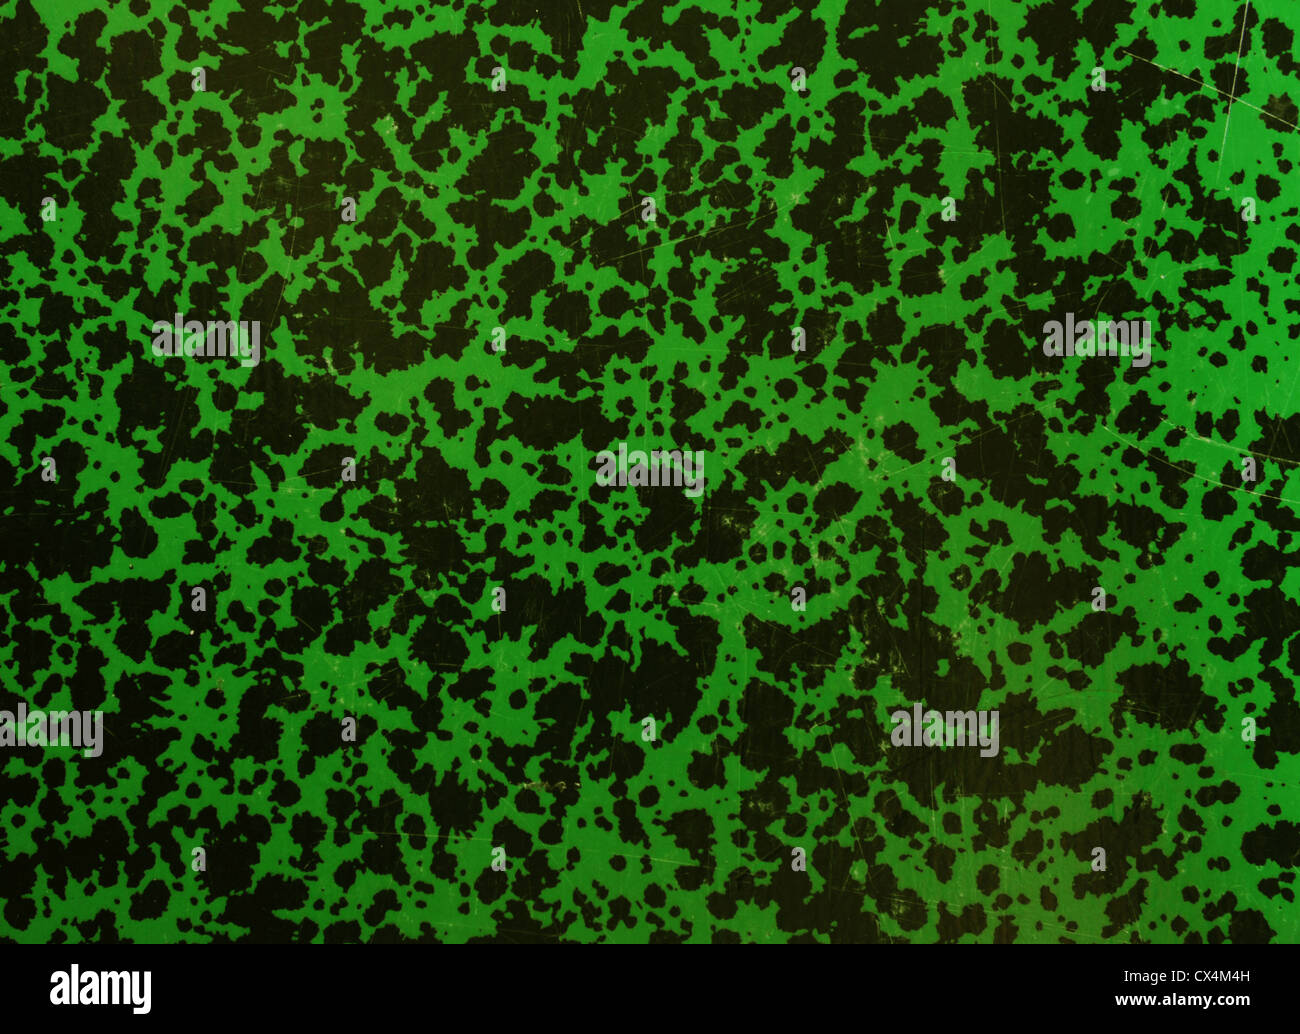 Black and green grunge scratched background. Stock Photo